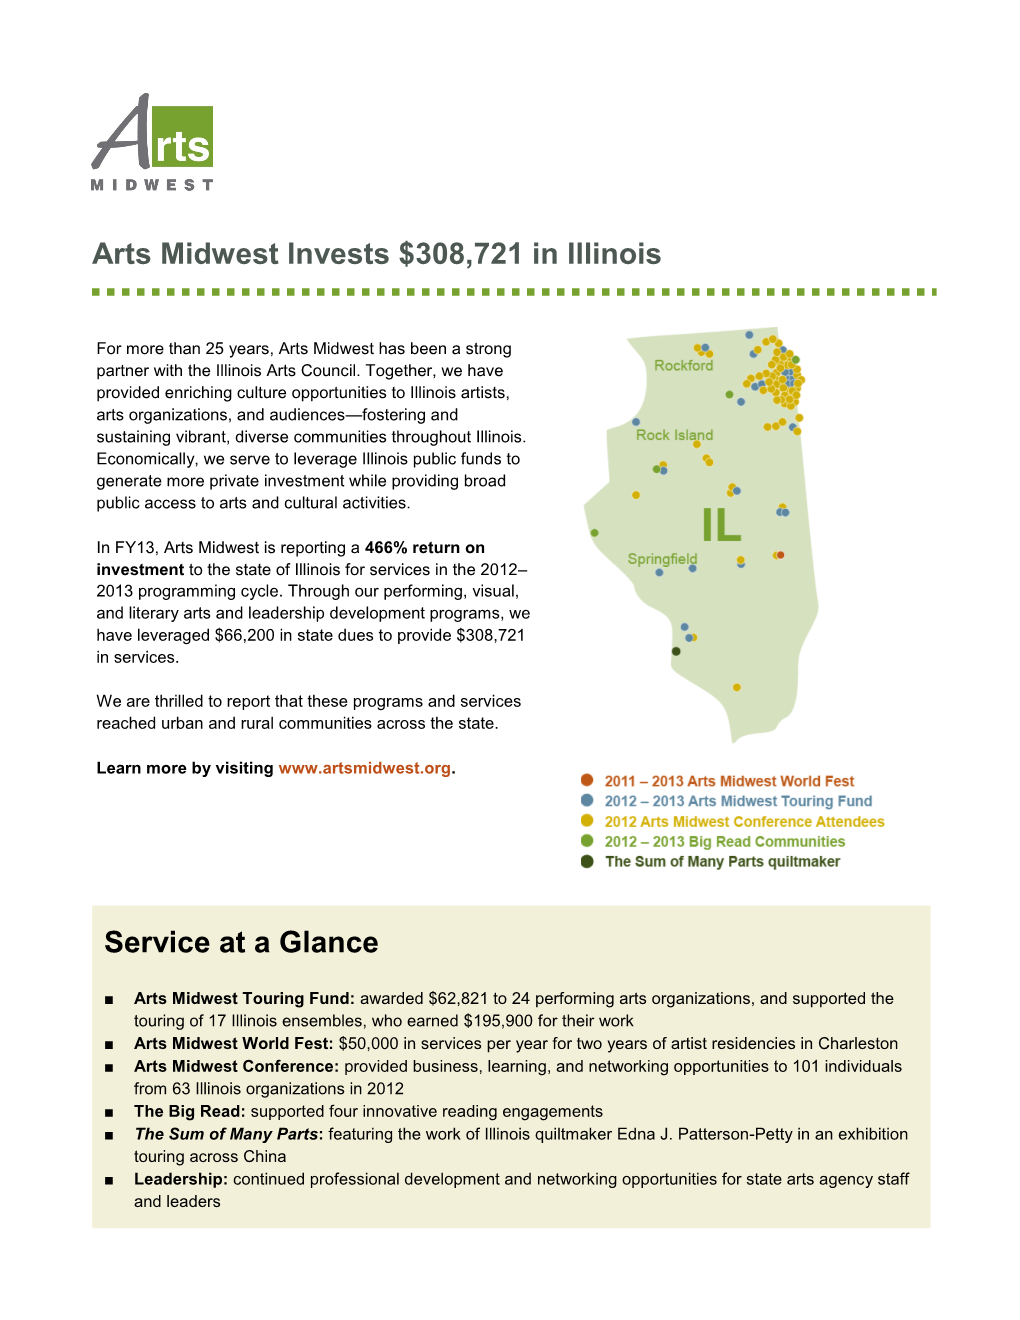 Arts Midwest Invests $308,721 in Illinois Service at a Glance